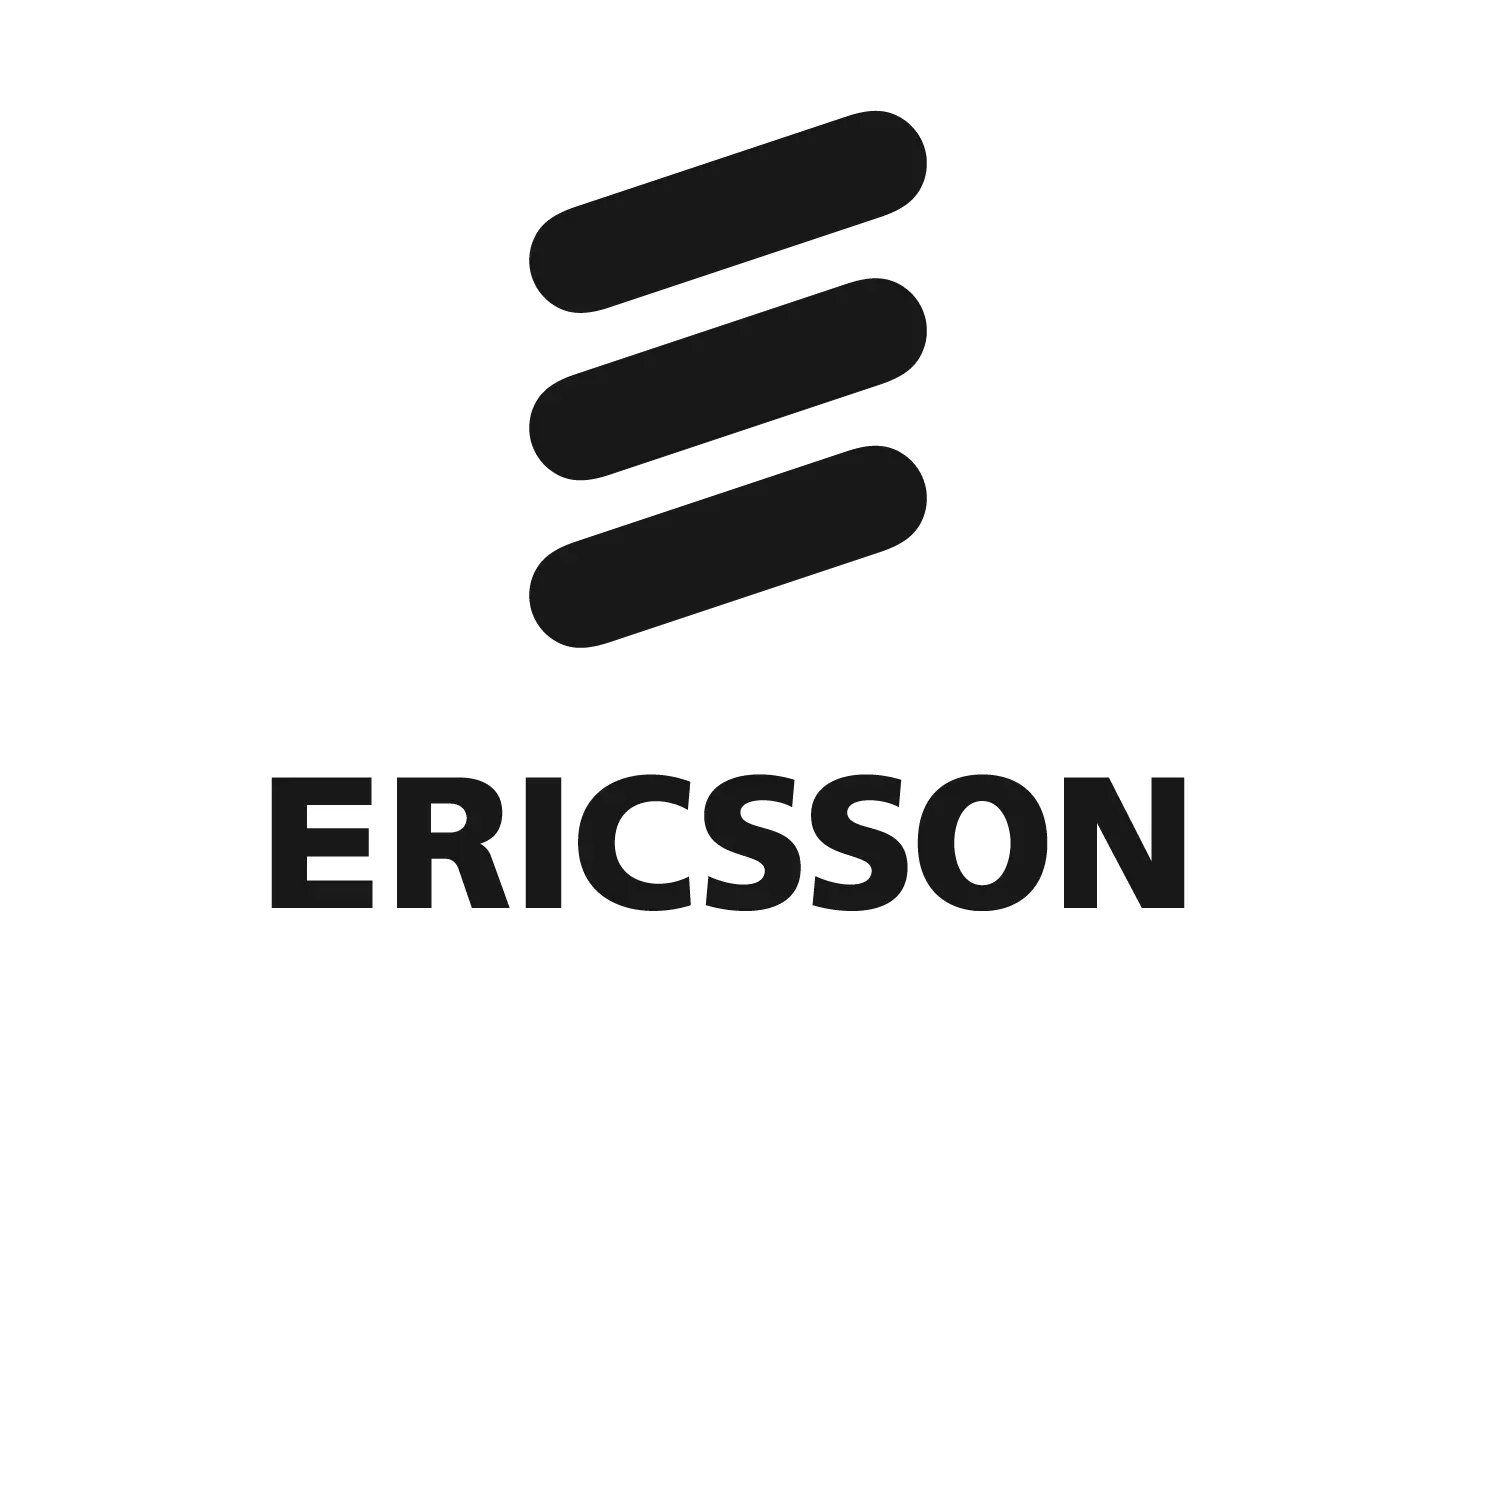 Ericsson report highlights potential economic benefits of 5G in emerging markets